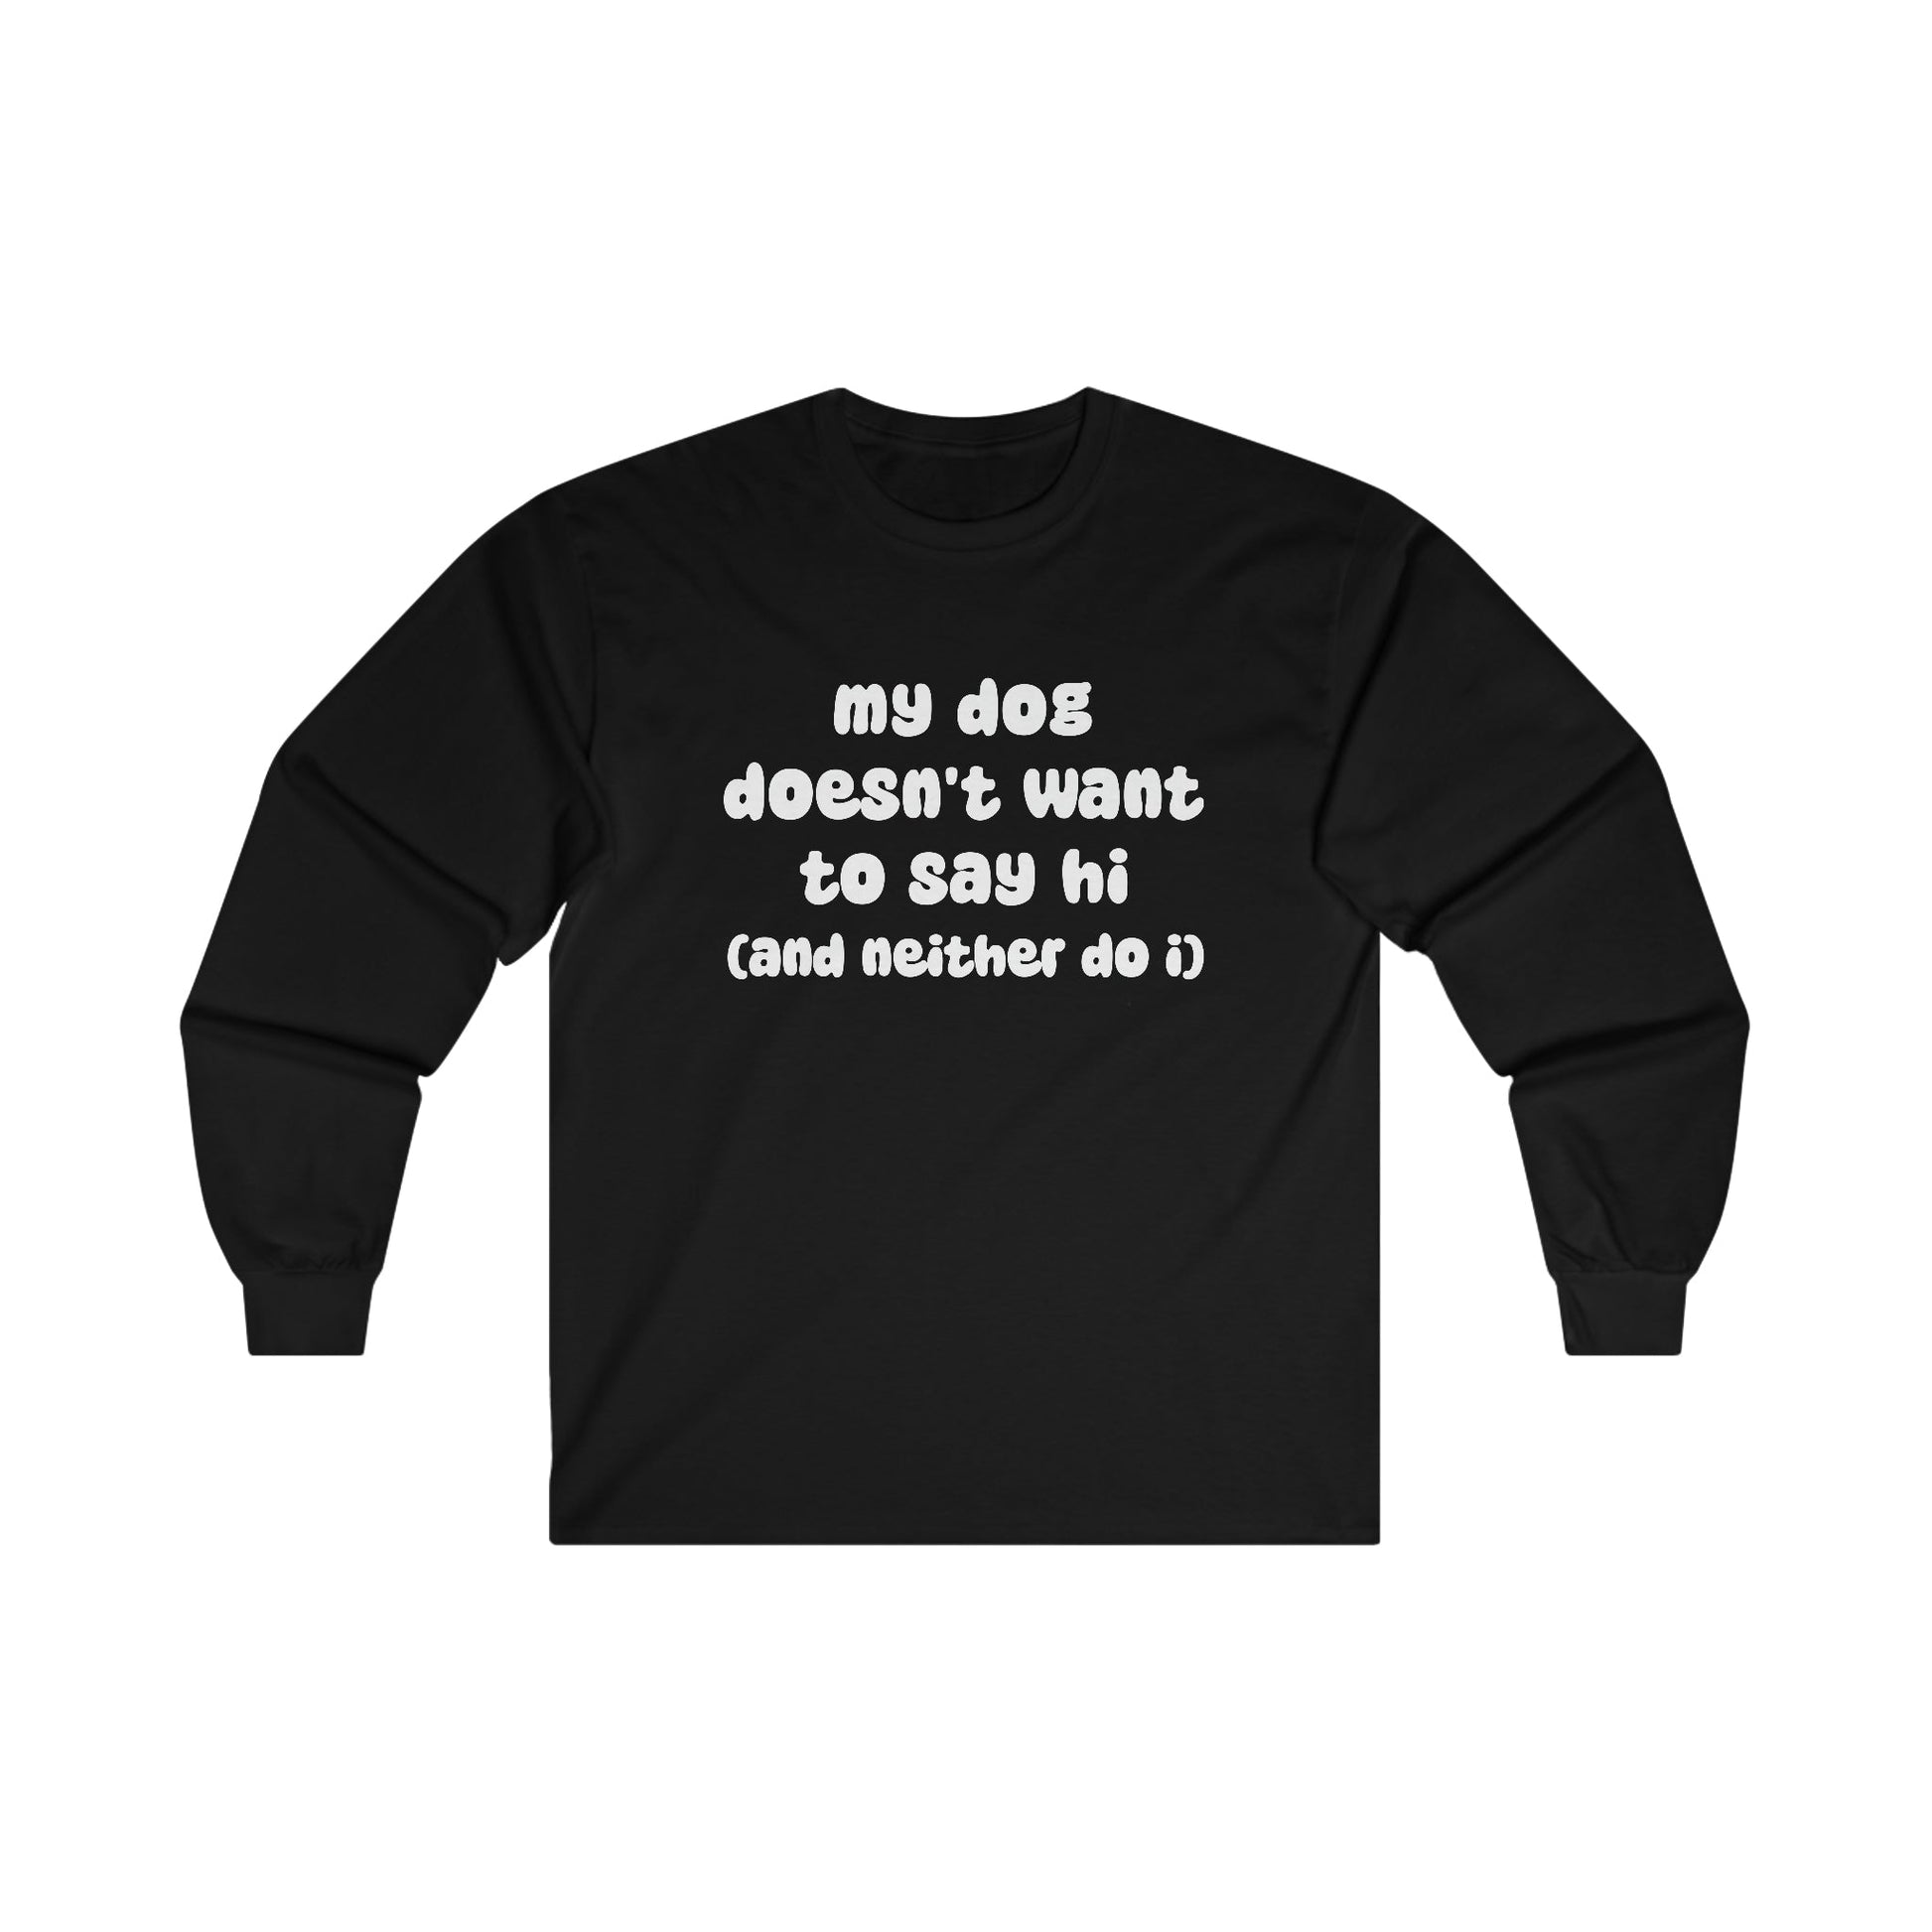 My Dog Doesn't Want To Say Hi (And Neither Do I) | Long Sleeve Tee - Detezi Designs-63337128024258053856